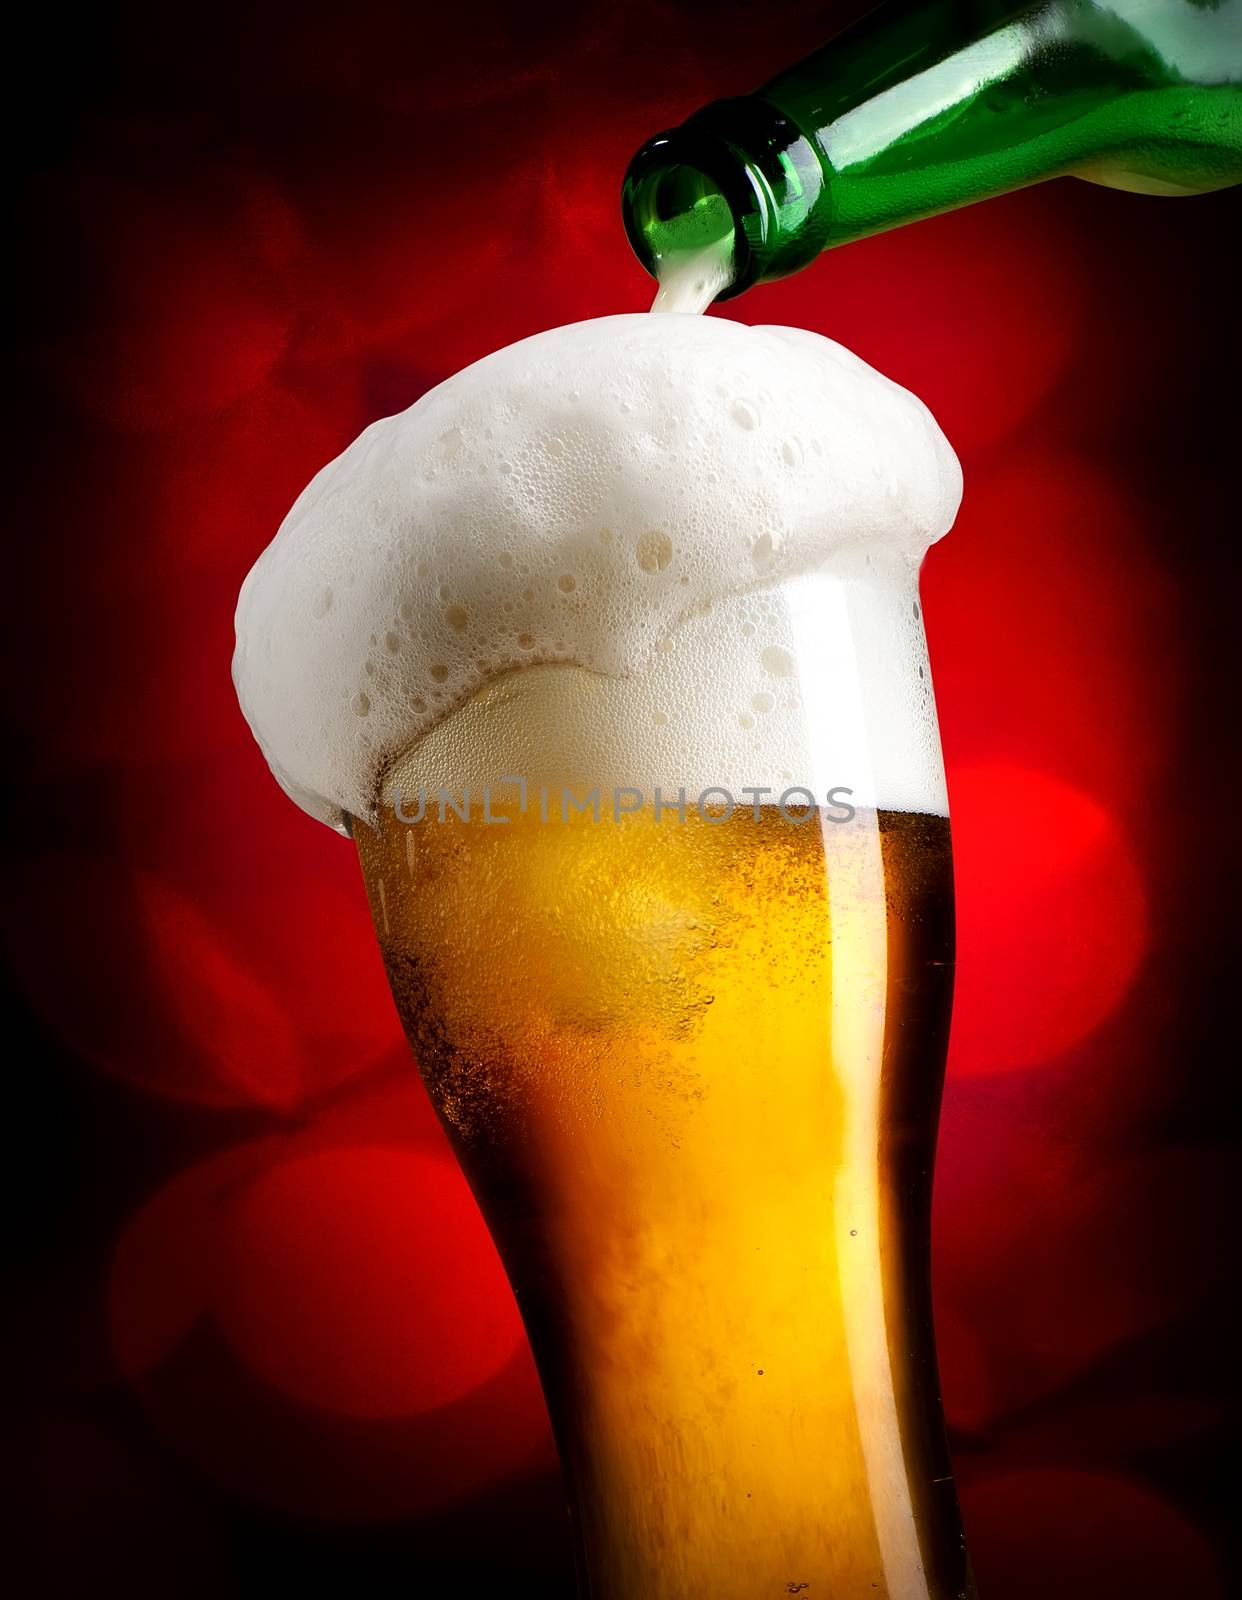 Beer pouring from bottle into glass on red background